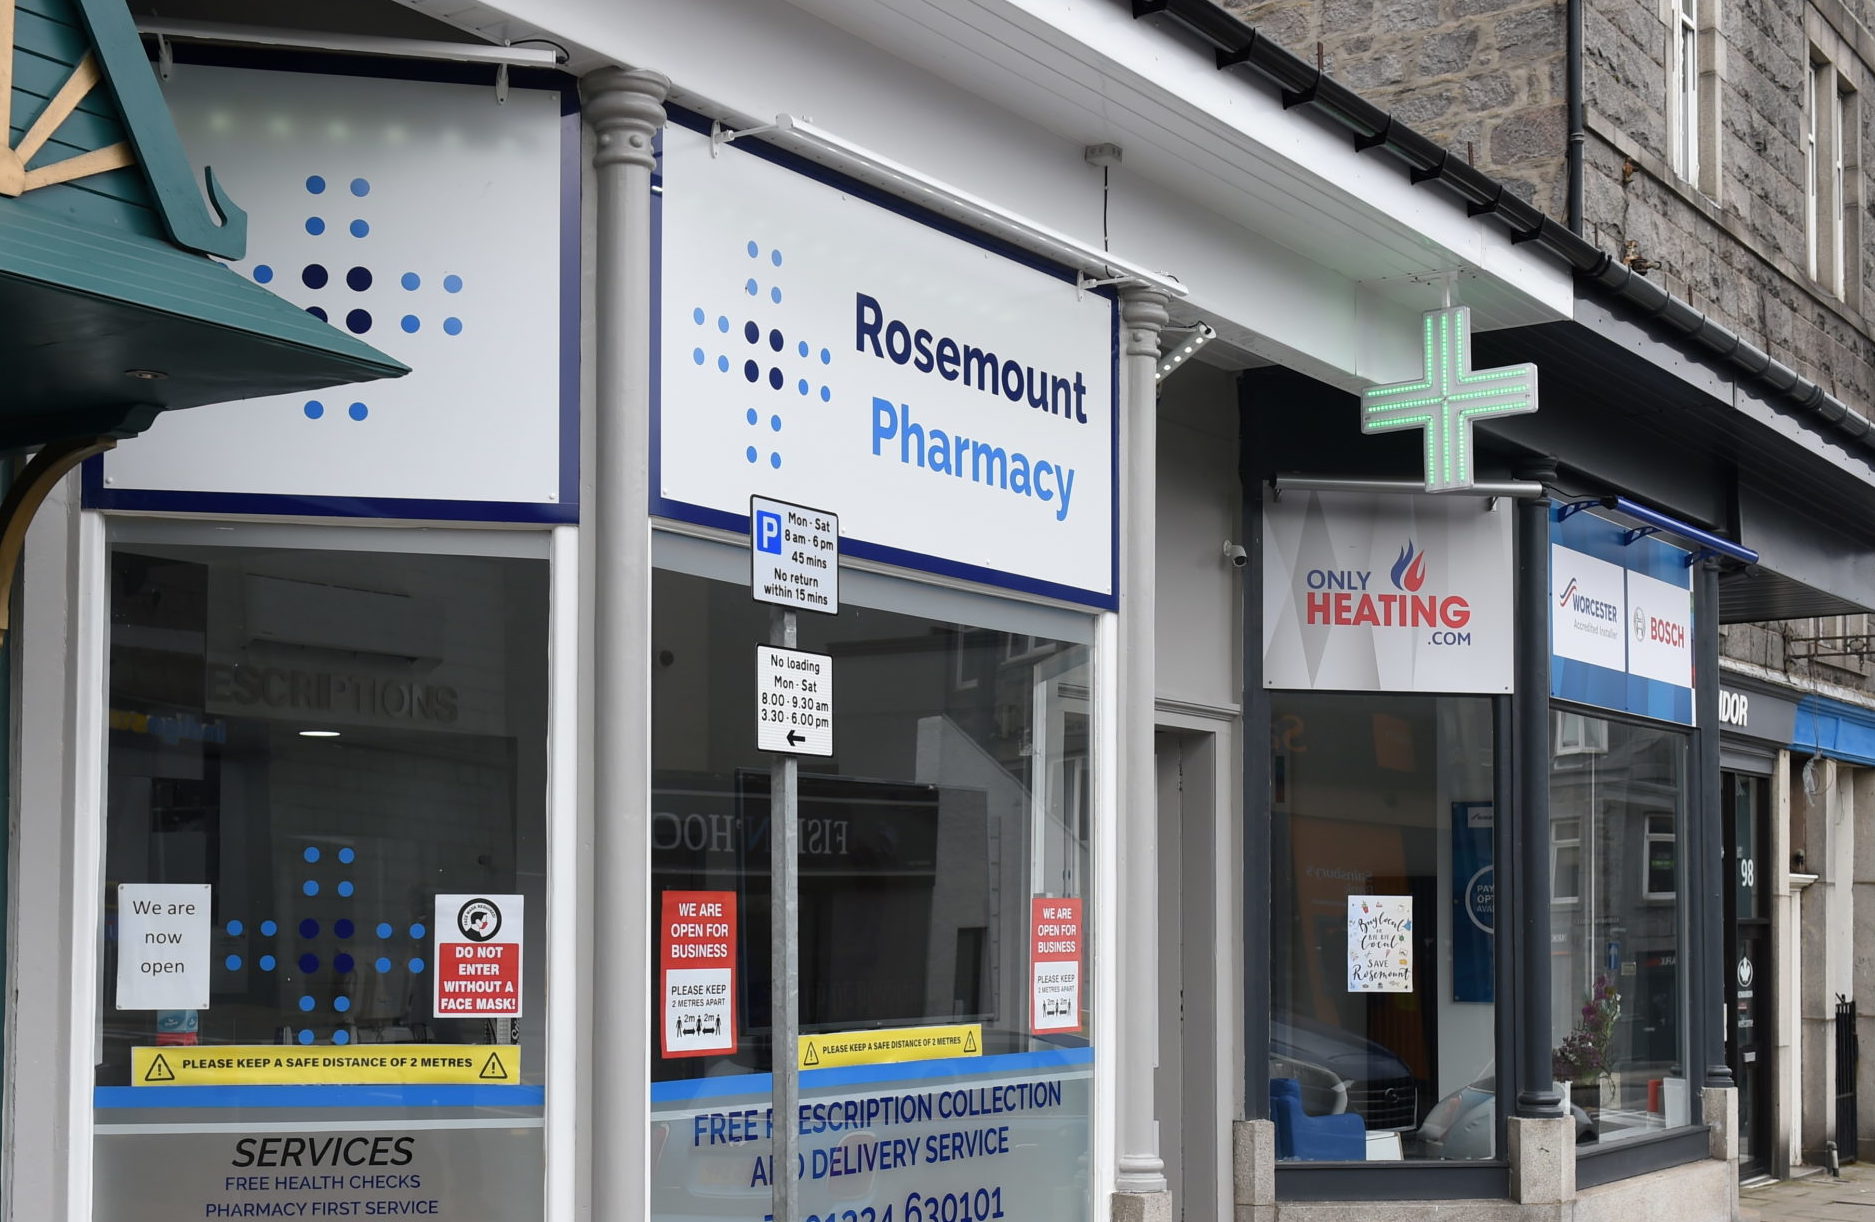 Rosemount Pharmacy is at the centre of concerns over anti-social behaviour